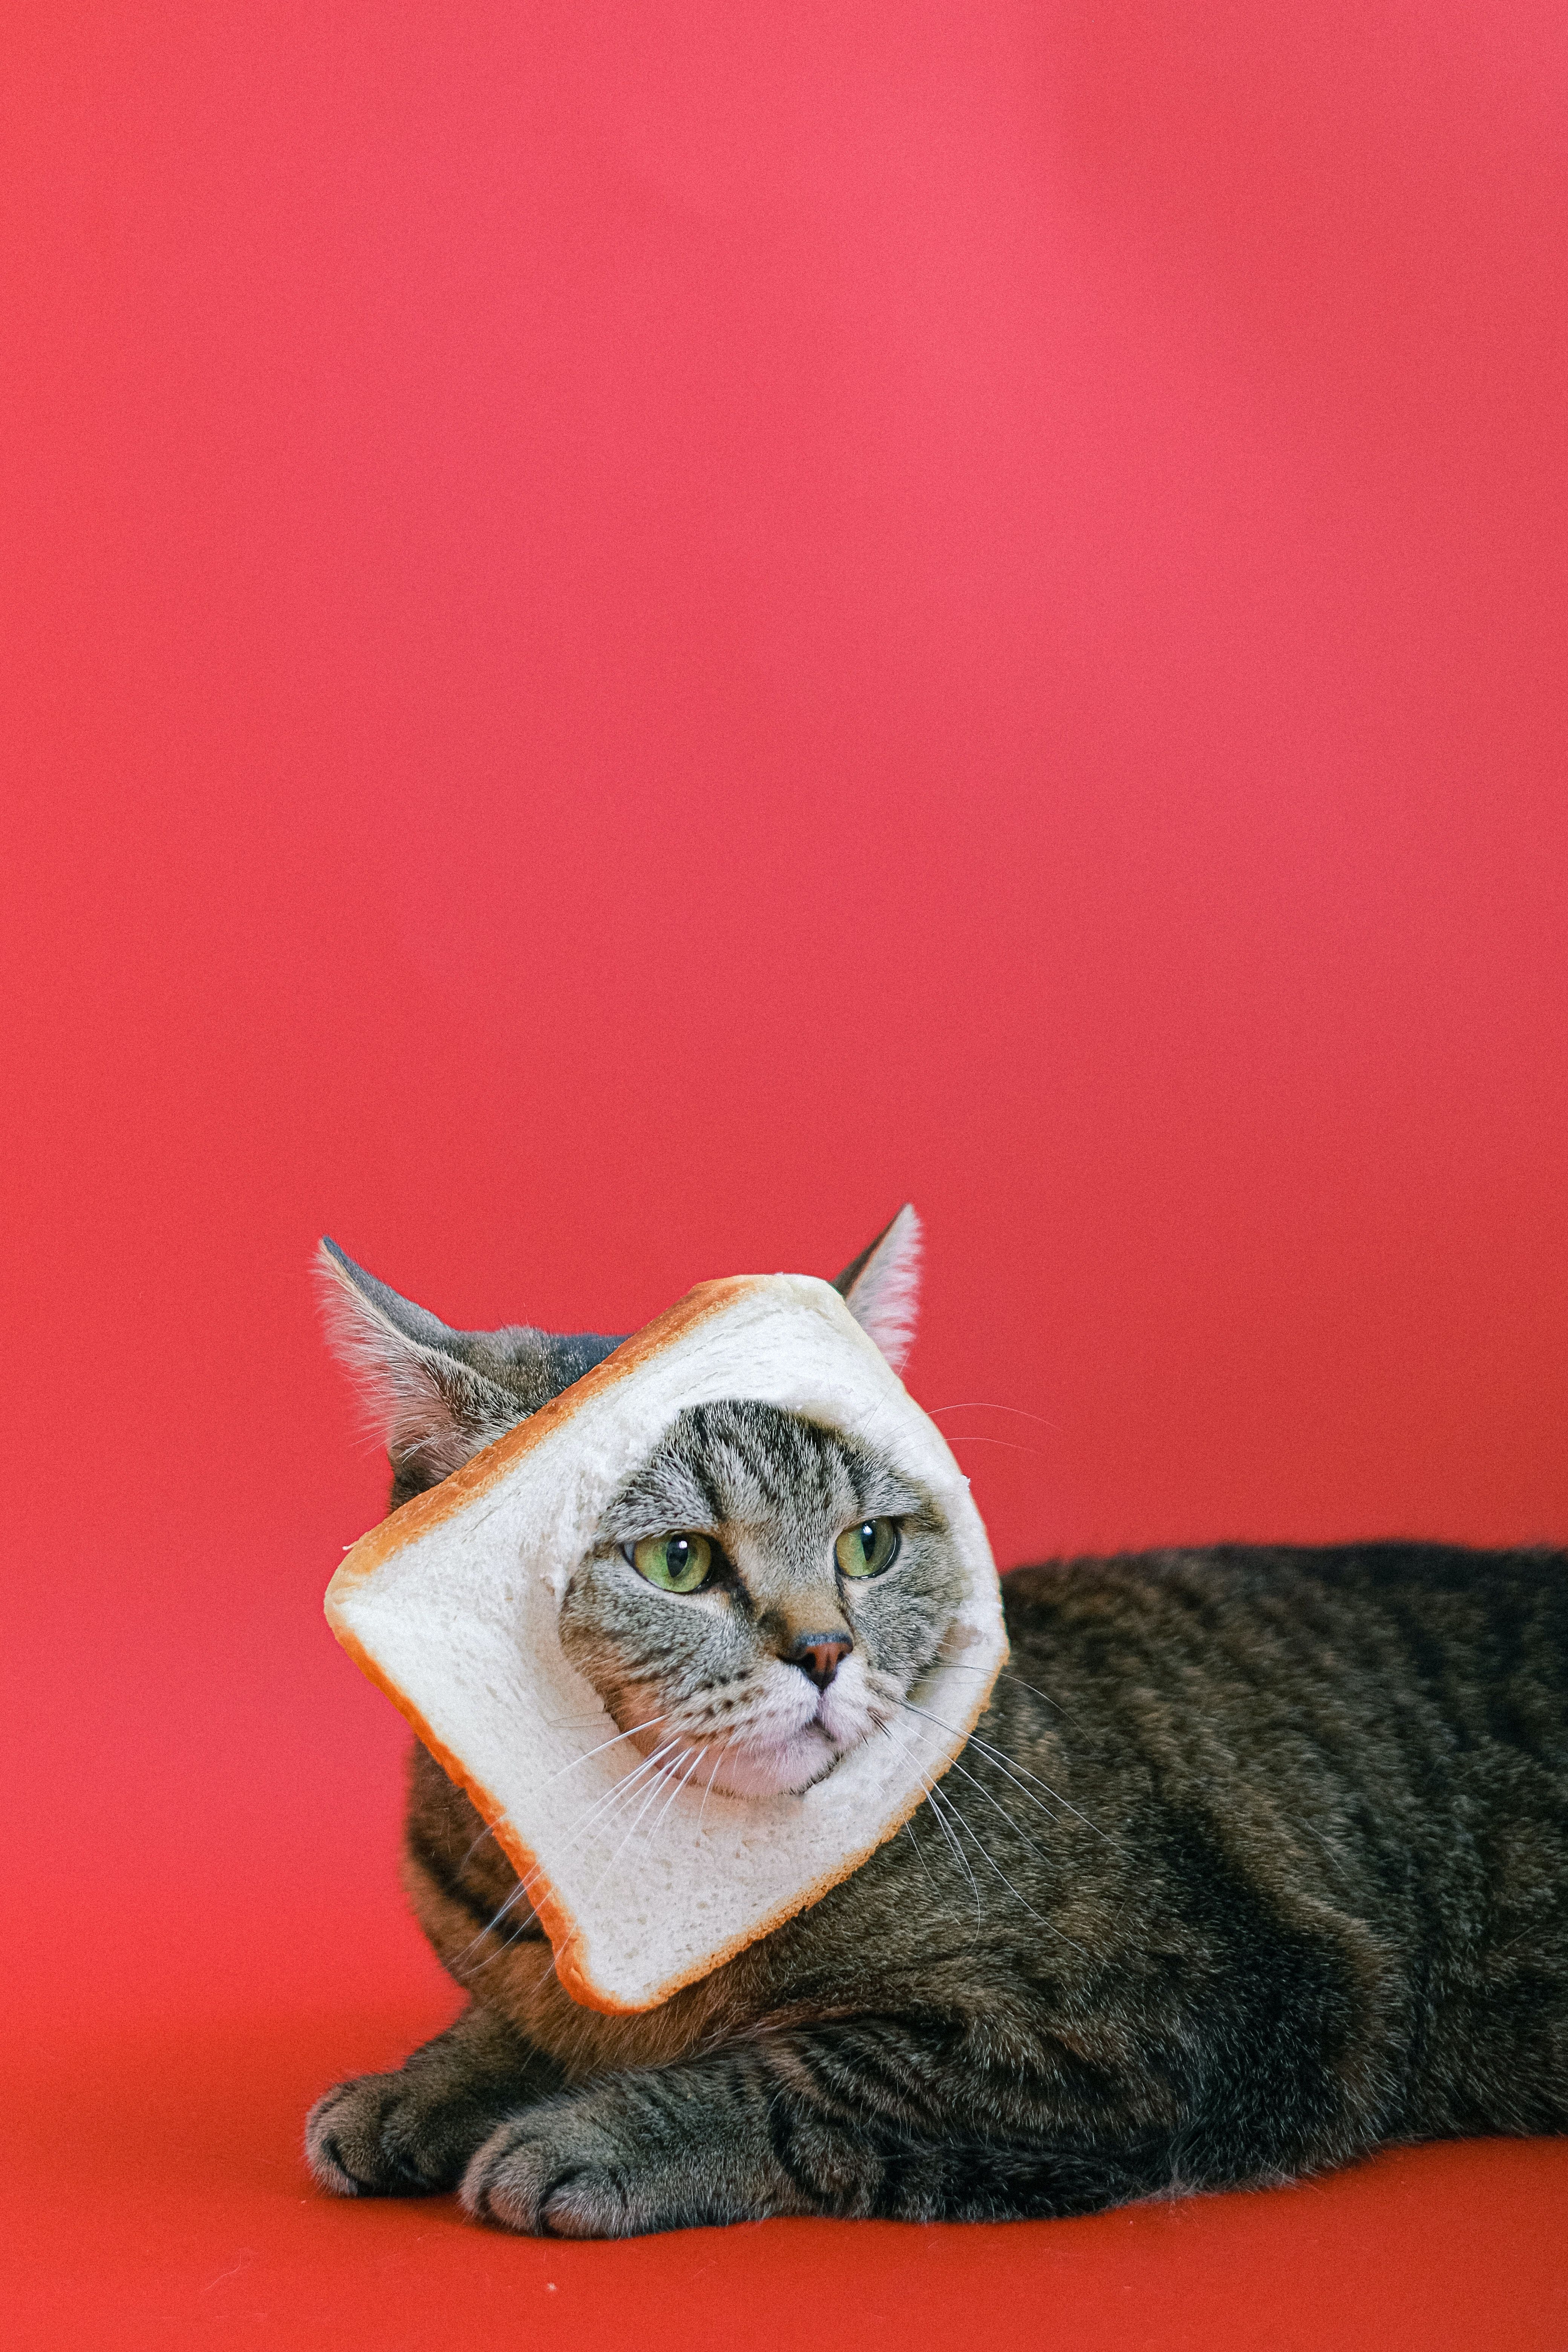 Brown Tabby Cat With Slice Of Loaf Bread On Head · Free